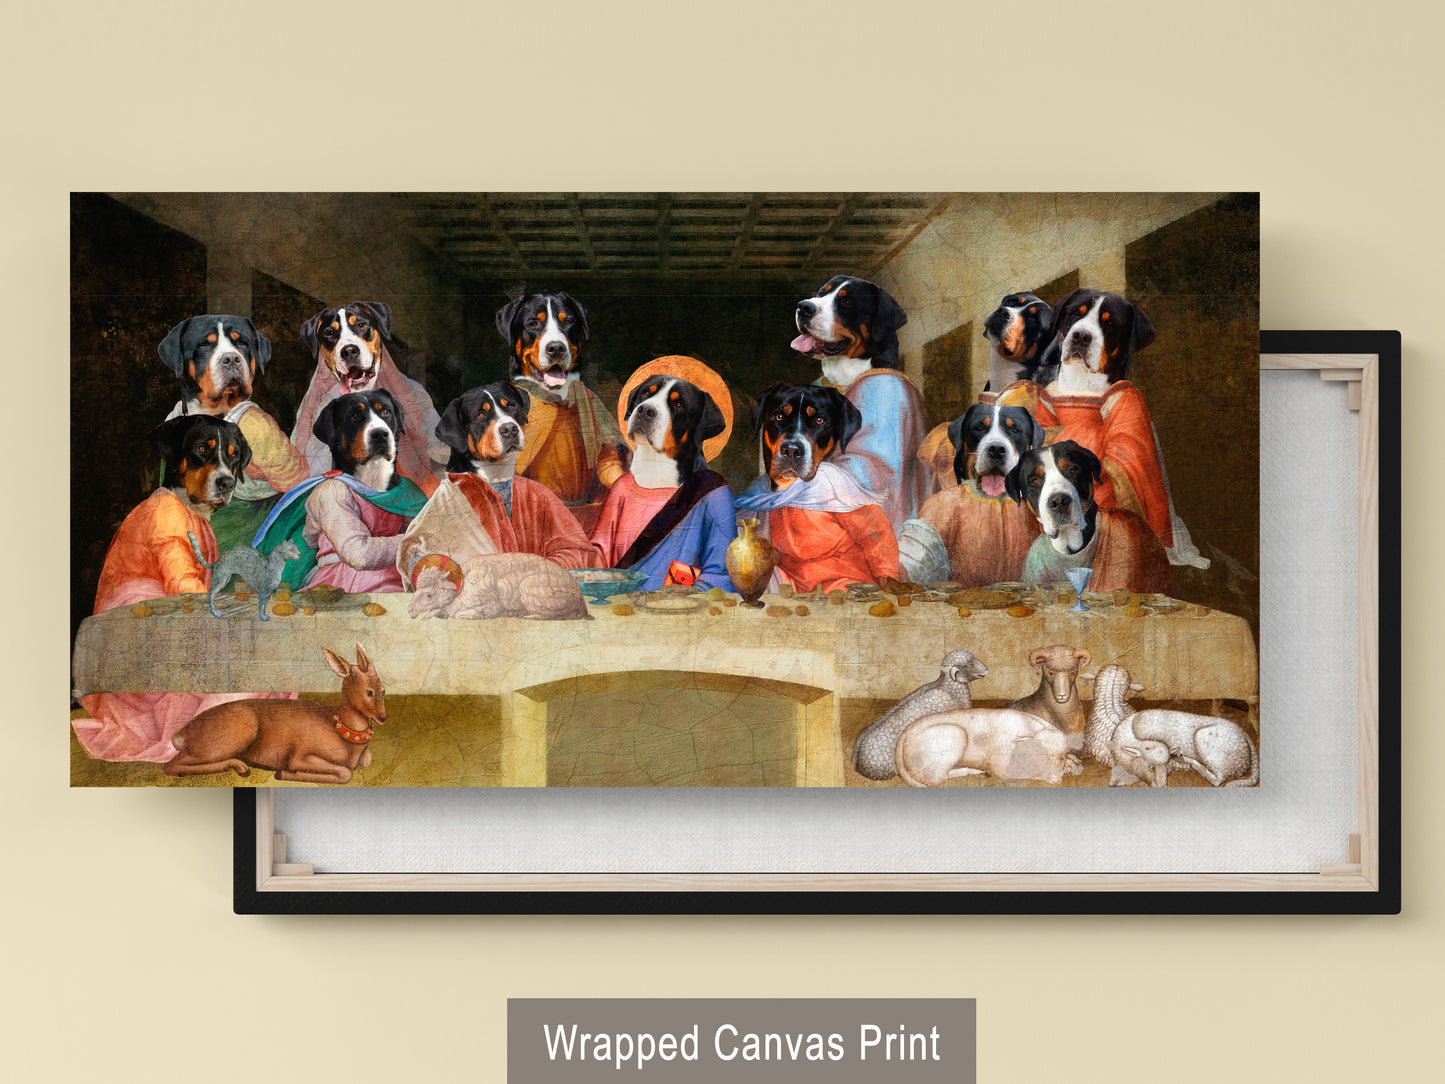 Greater Swiss Mountain Dog Last Supper Renaissance Dog Painting